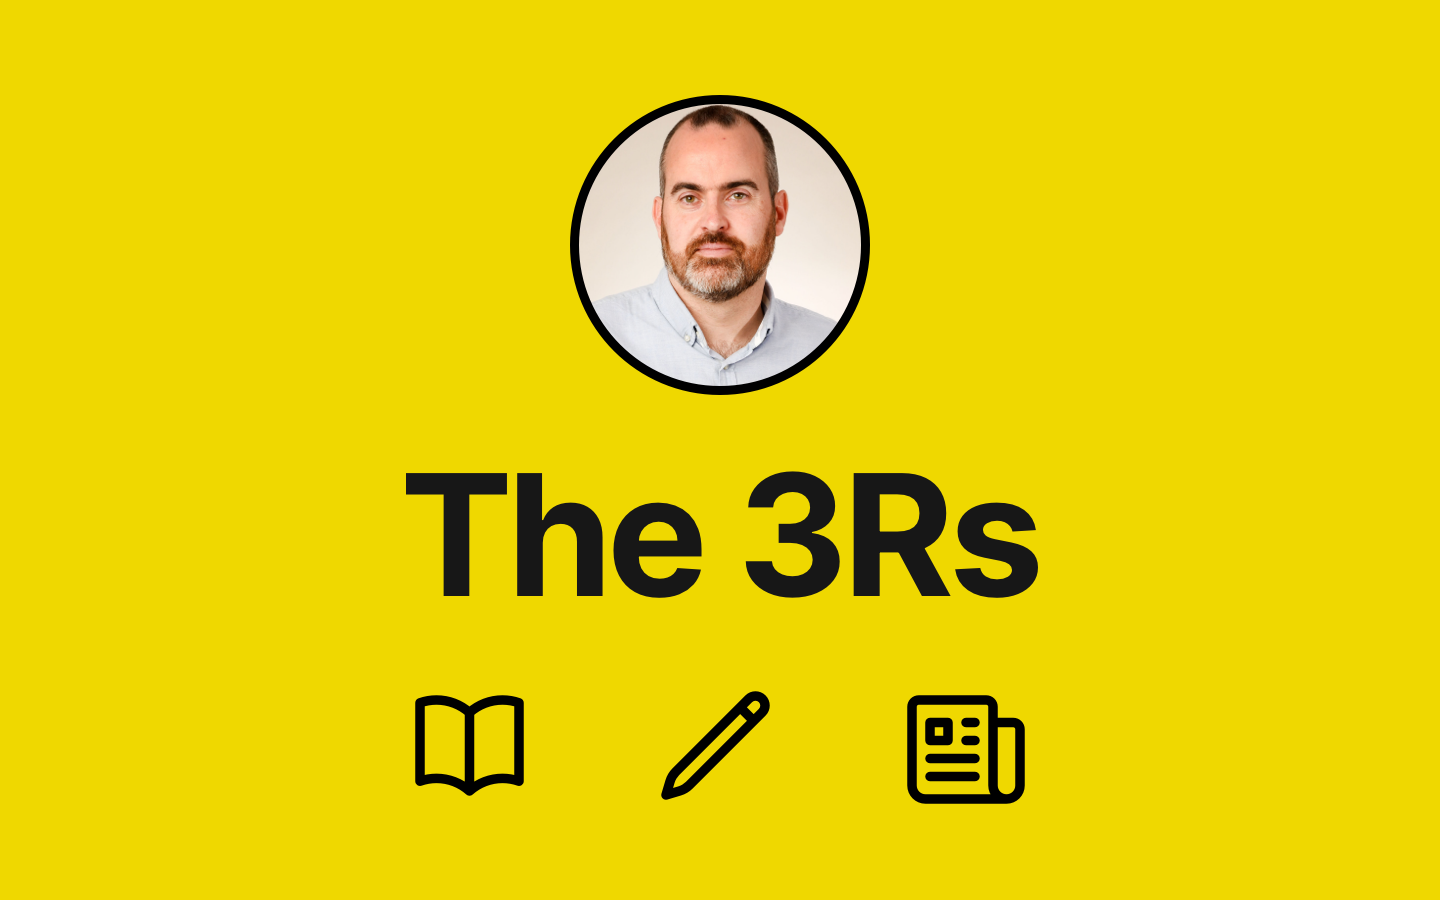 The 3Rs - Reading, writing, and research to be interested in #36 feature image